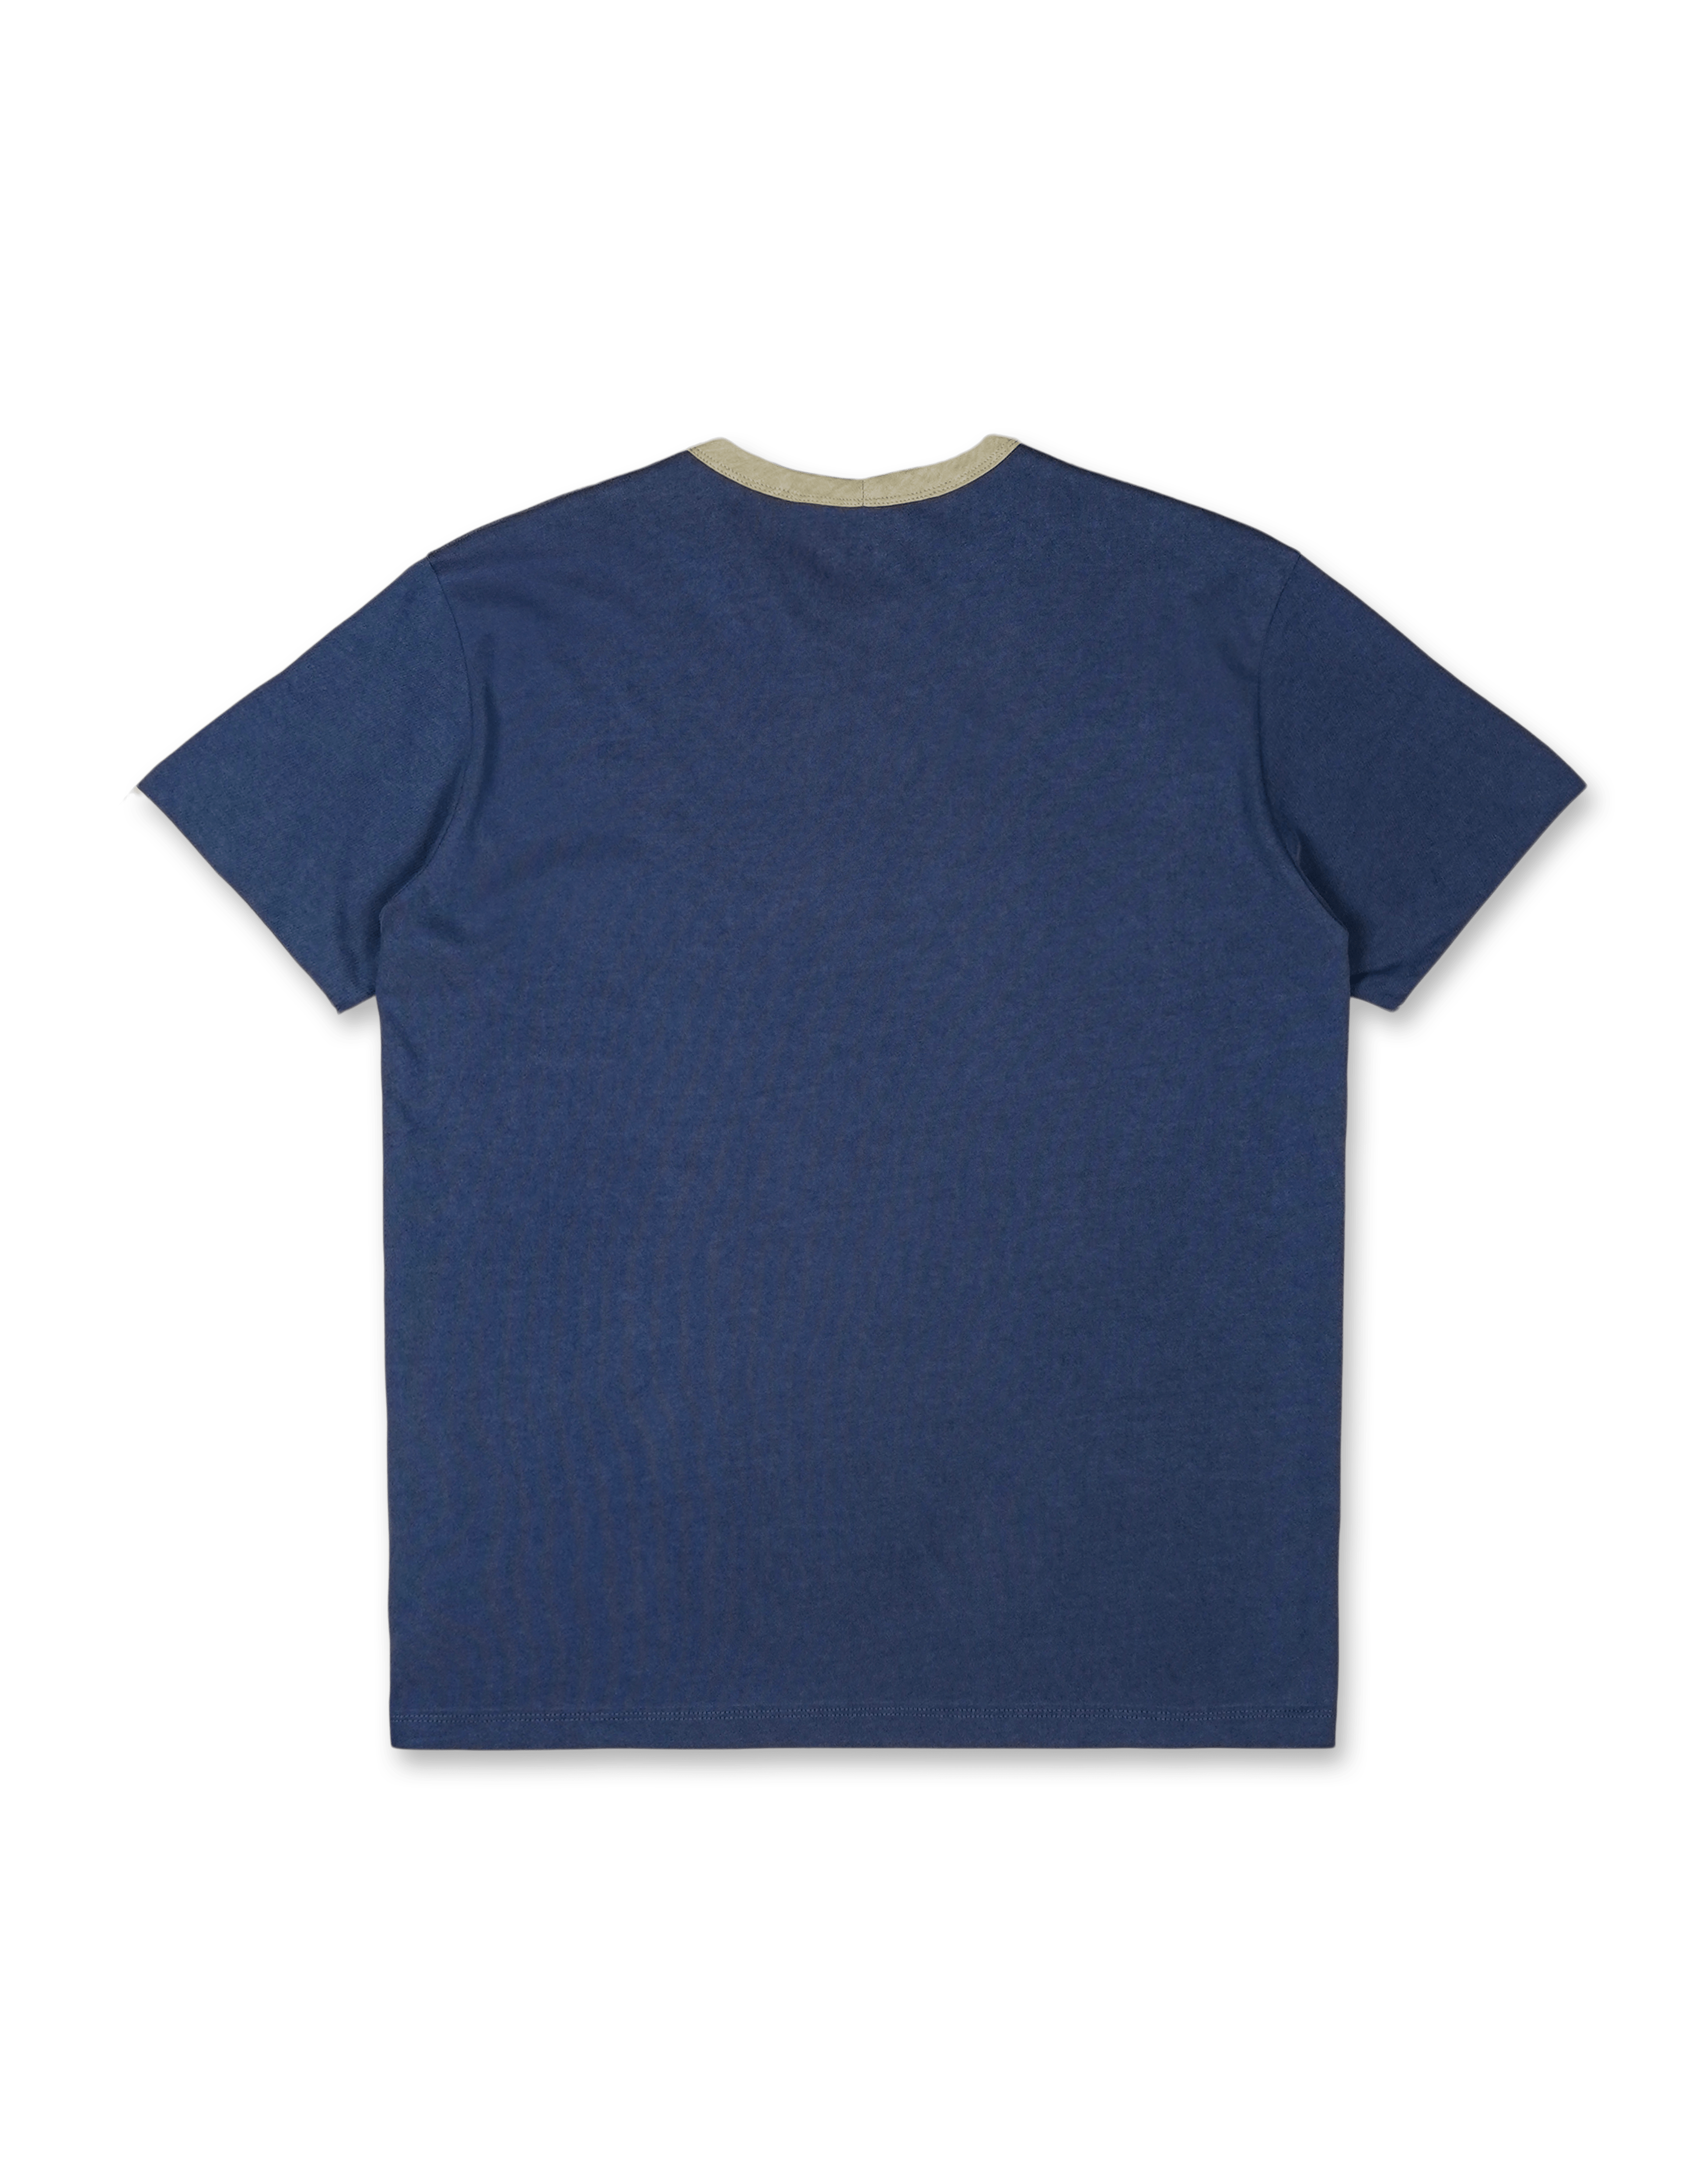 Embroidery T-Shirt